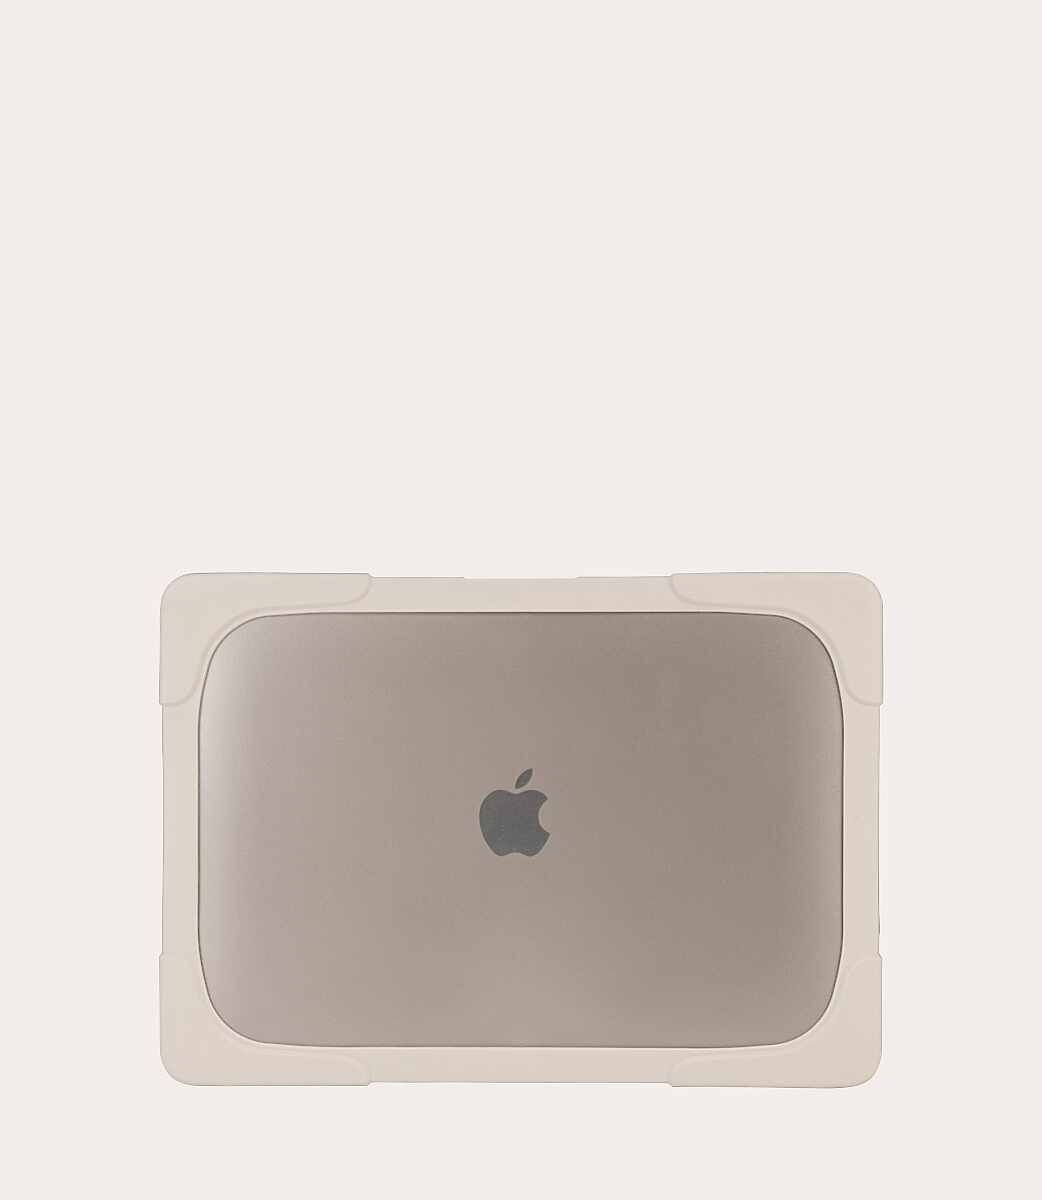 Tucano Scocca Hard Shell Case for Macbook Air 13-Inch - Beige